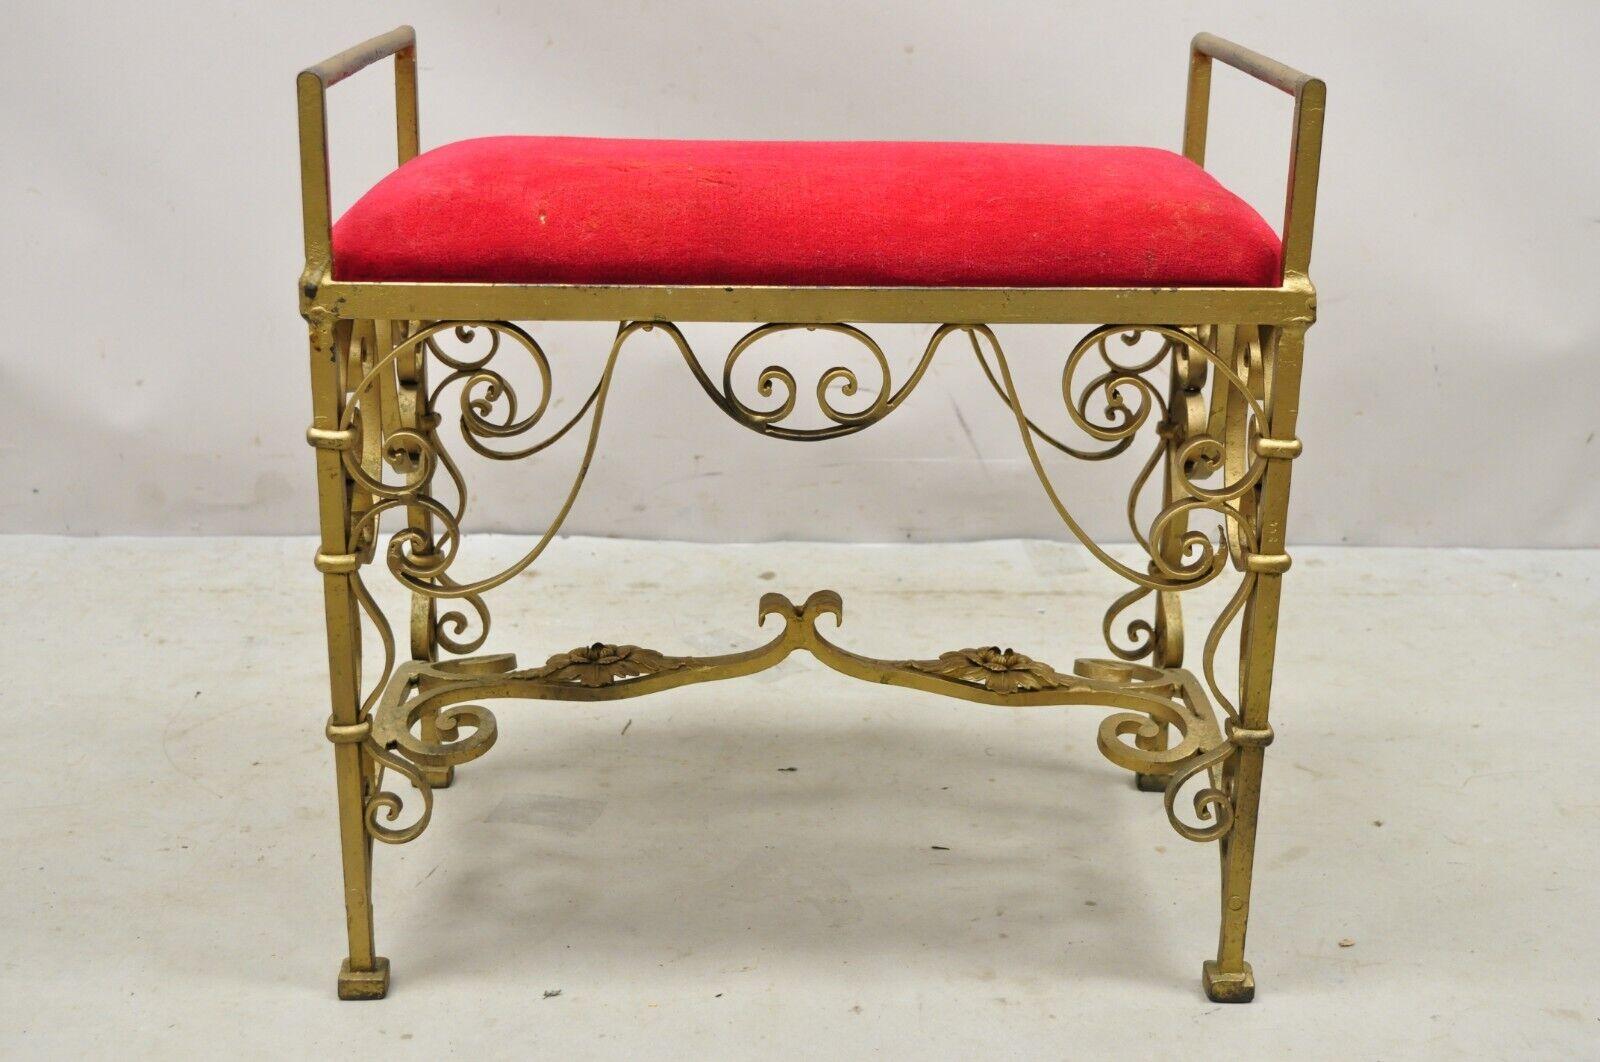 Vintage Gold Hollywood Regency Gothic Iron Scrolling Vanity Bench Seat Stool For Sale 6